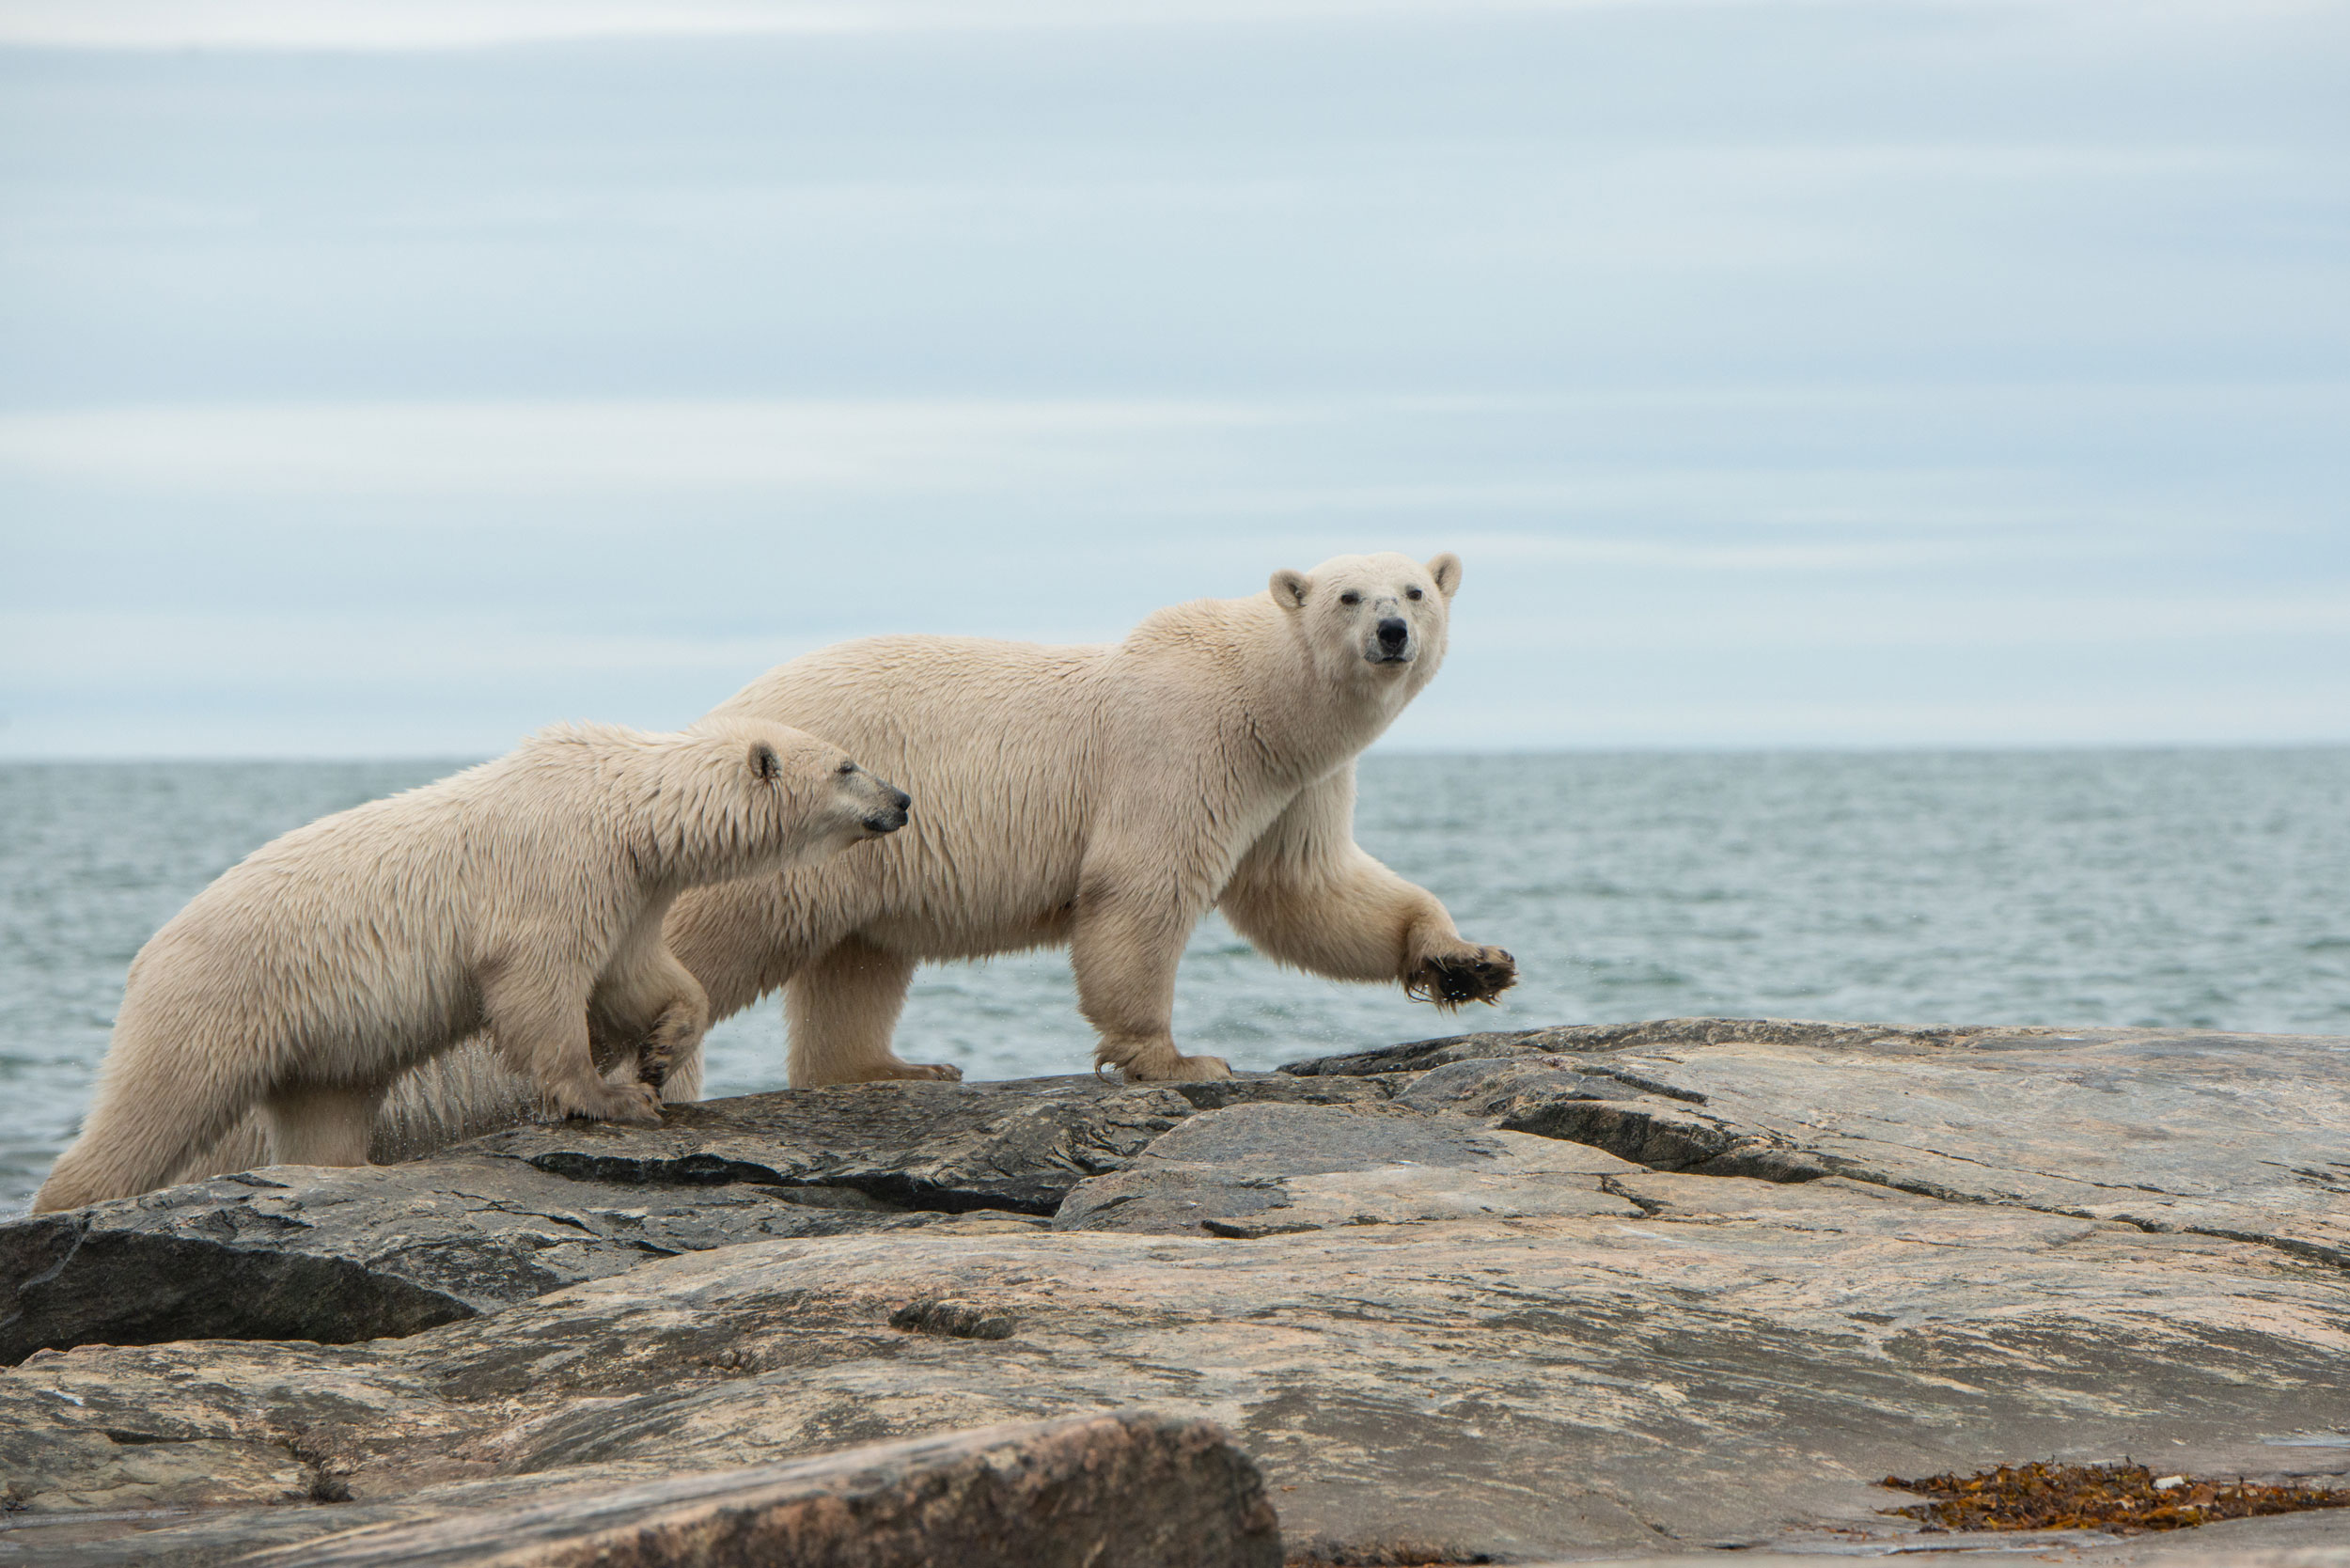 Polar bears are often spotted around Arviat, searching for the same sustenance as the human hunters.